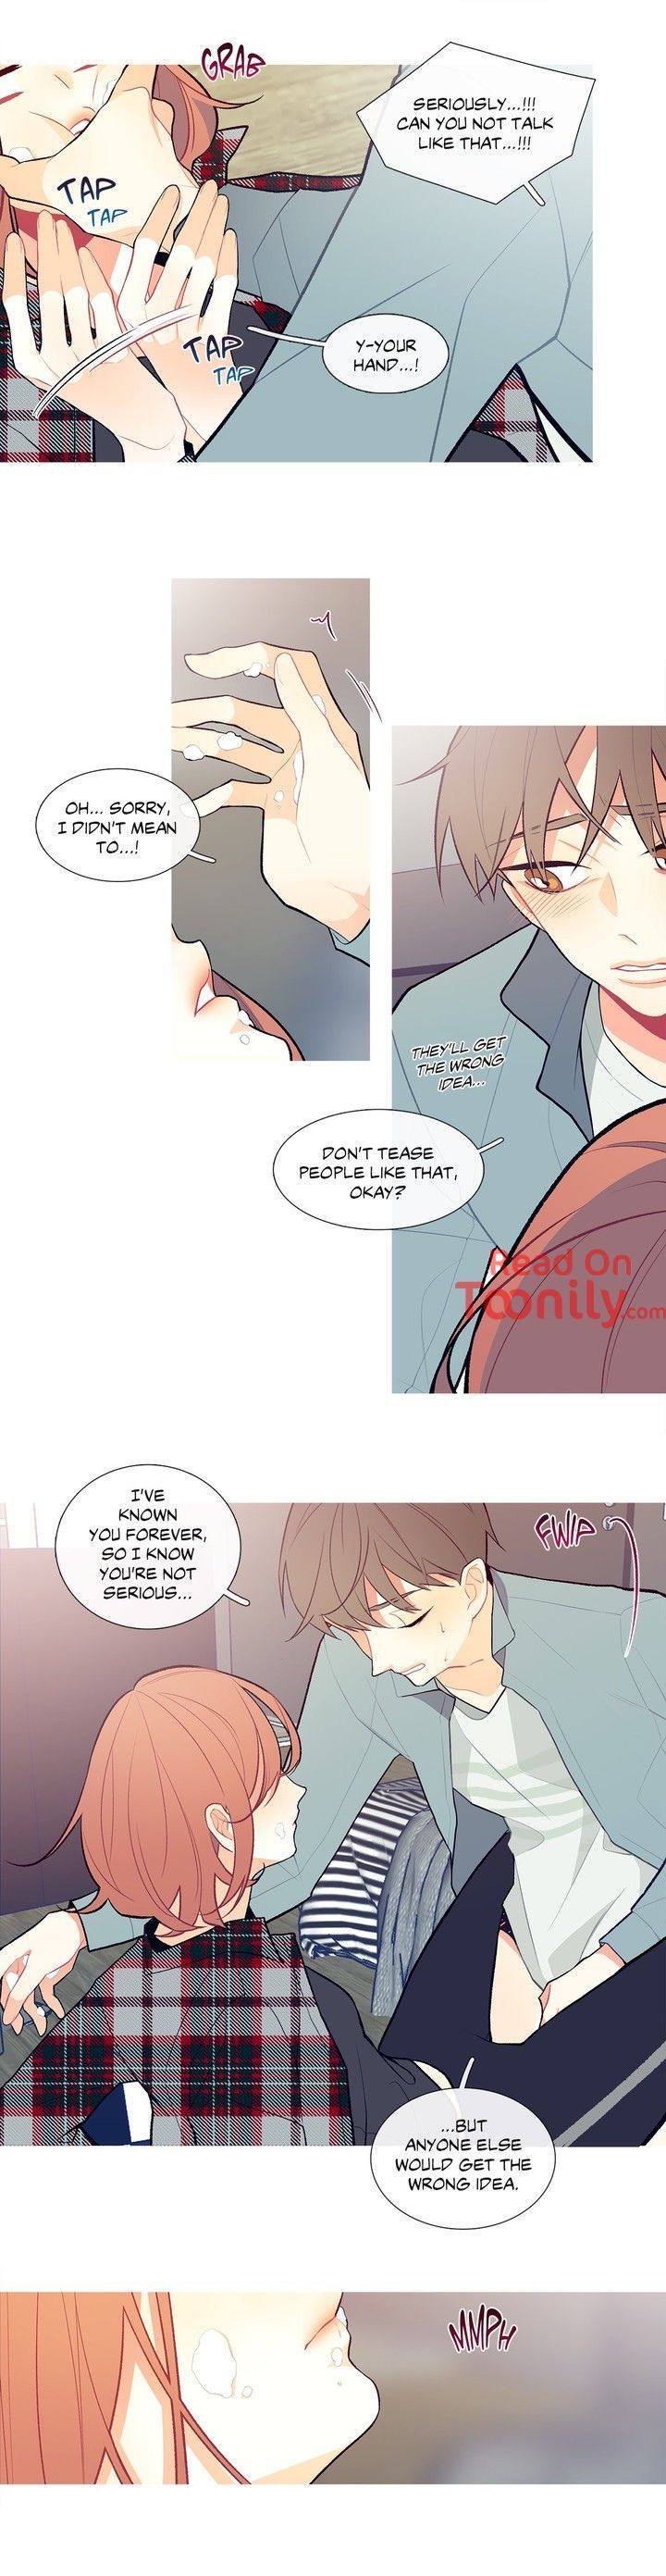 whats-going-on-chap-3-15